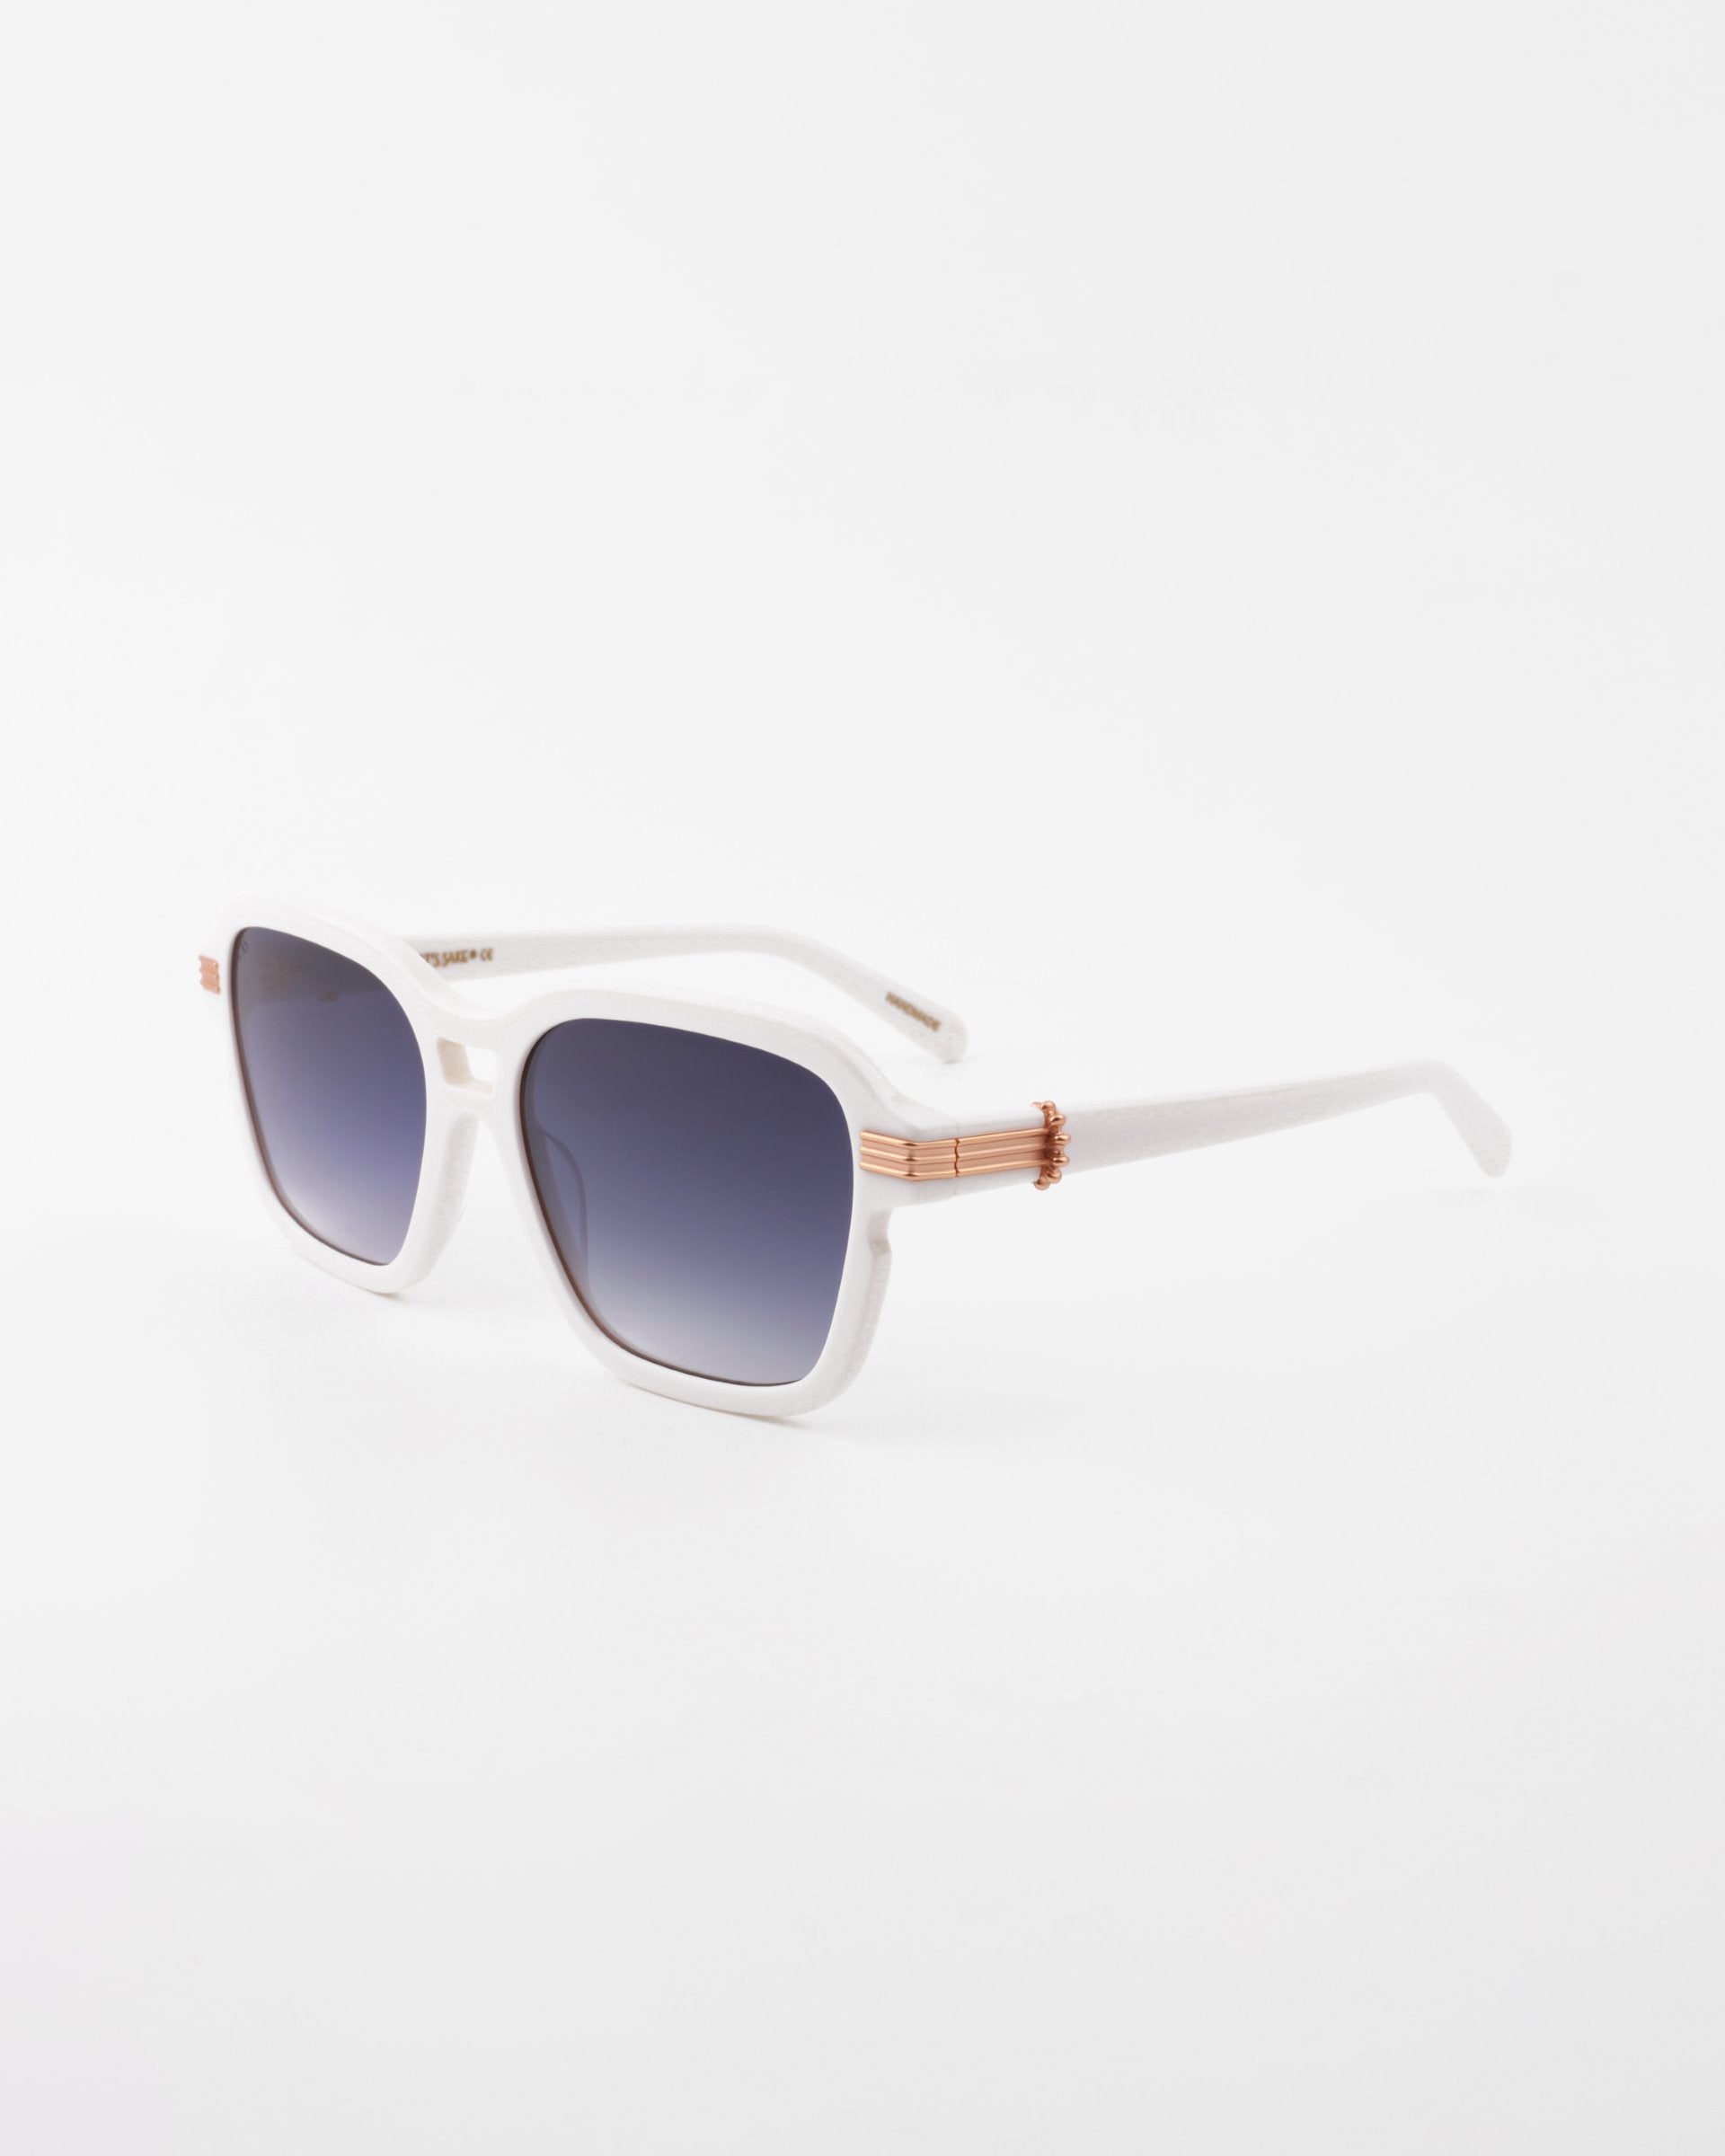 A pair of stylish white sunglasses with square frames, gradient dark to light shatter-resistant nylon lenses, and gold-plated temple detail on the hinges, displayed on a clean white background. The sunglasses are the Shadyside by For Art&#39;s Sake®.